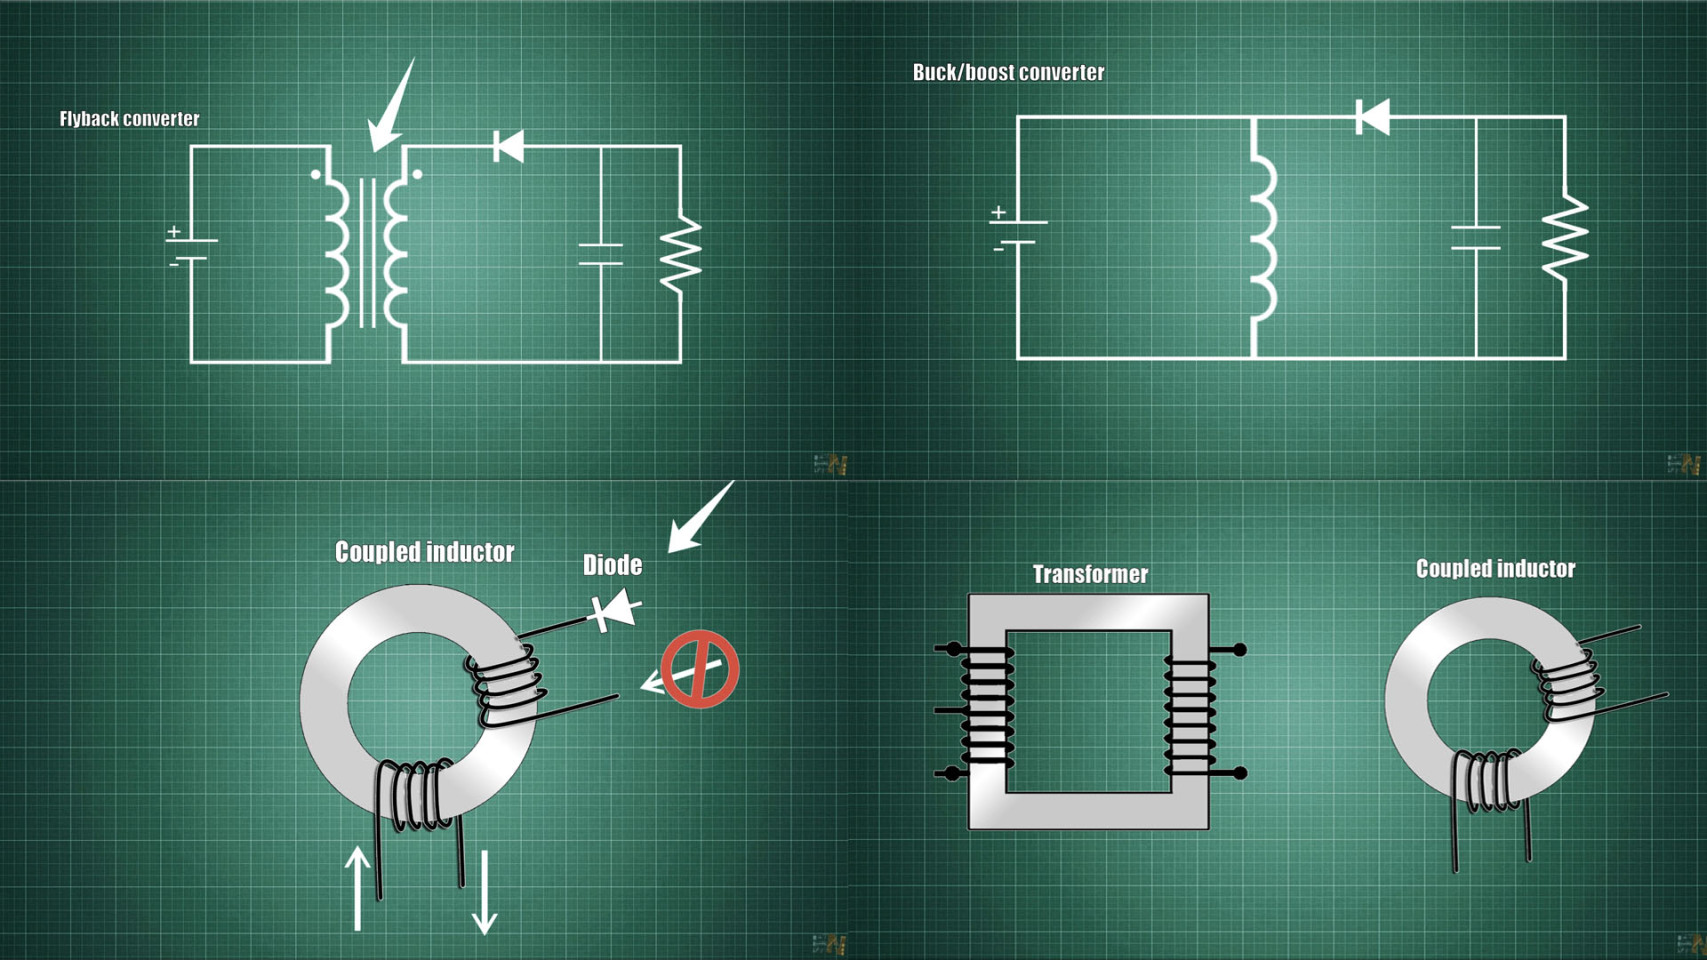 Coupled inductor